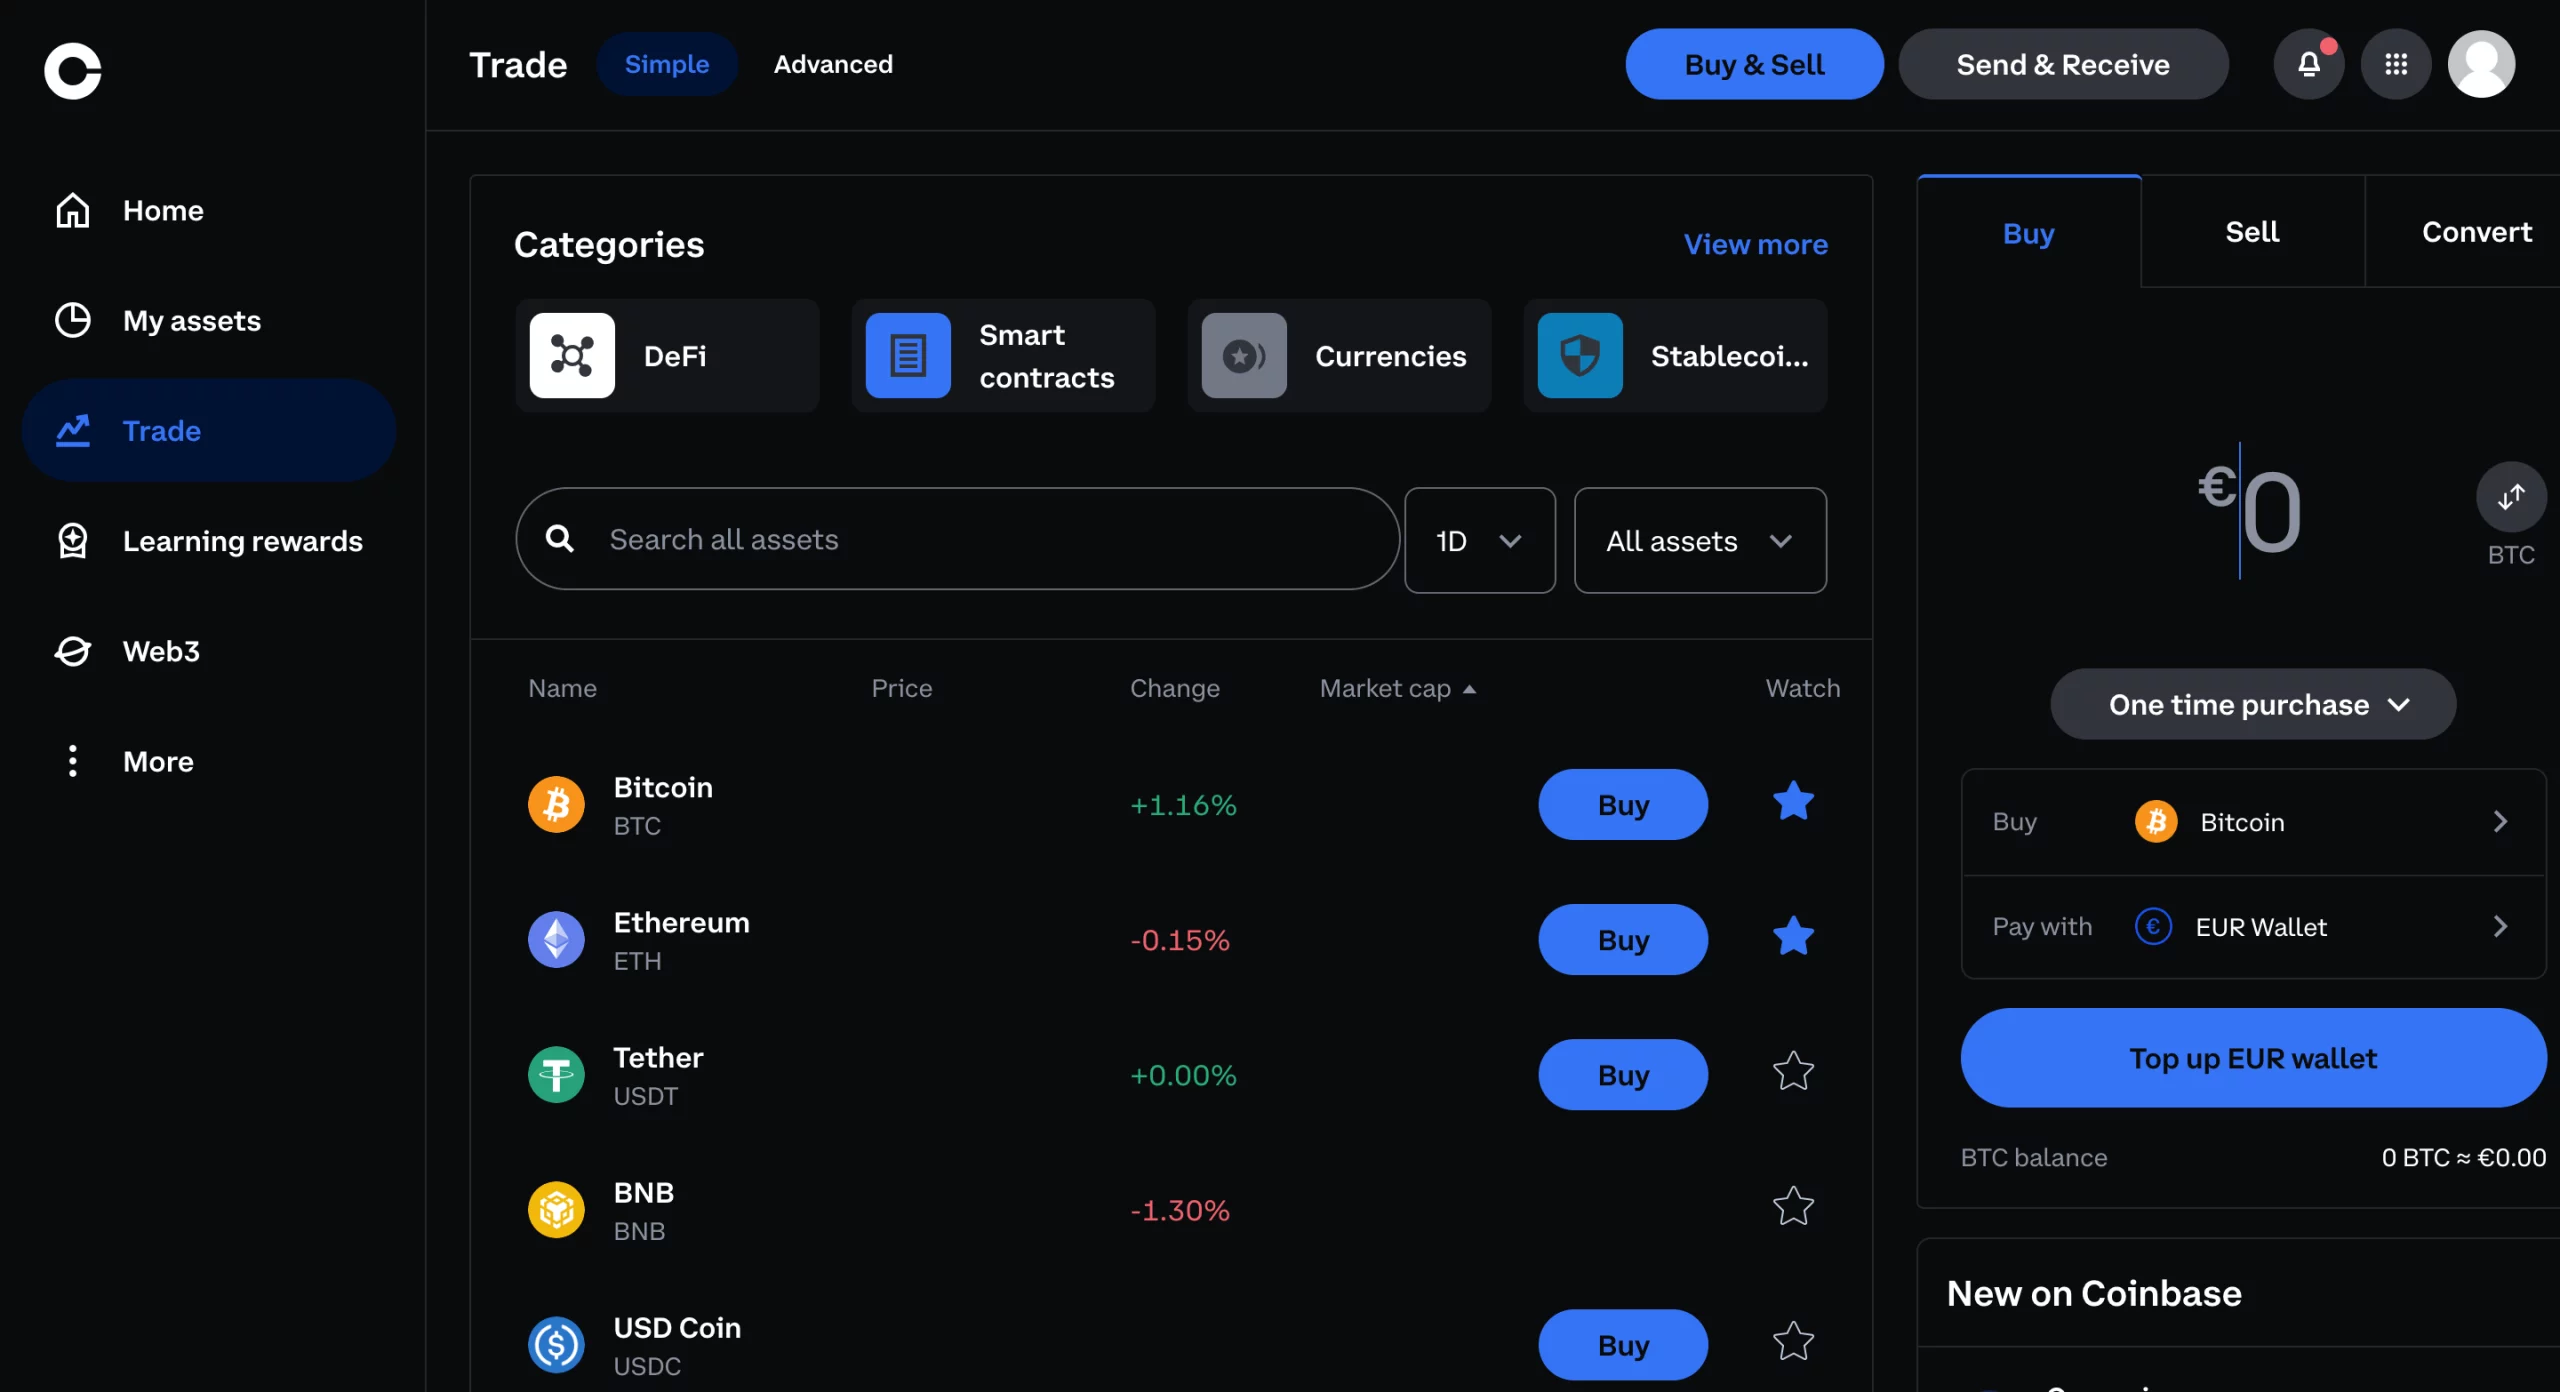 About Coinbase Simple Trade